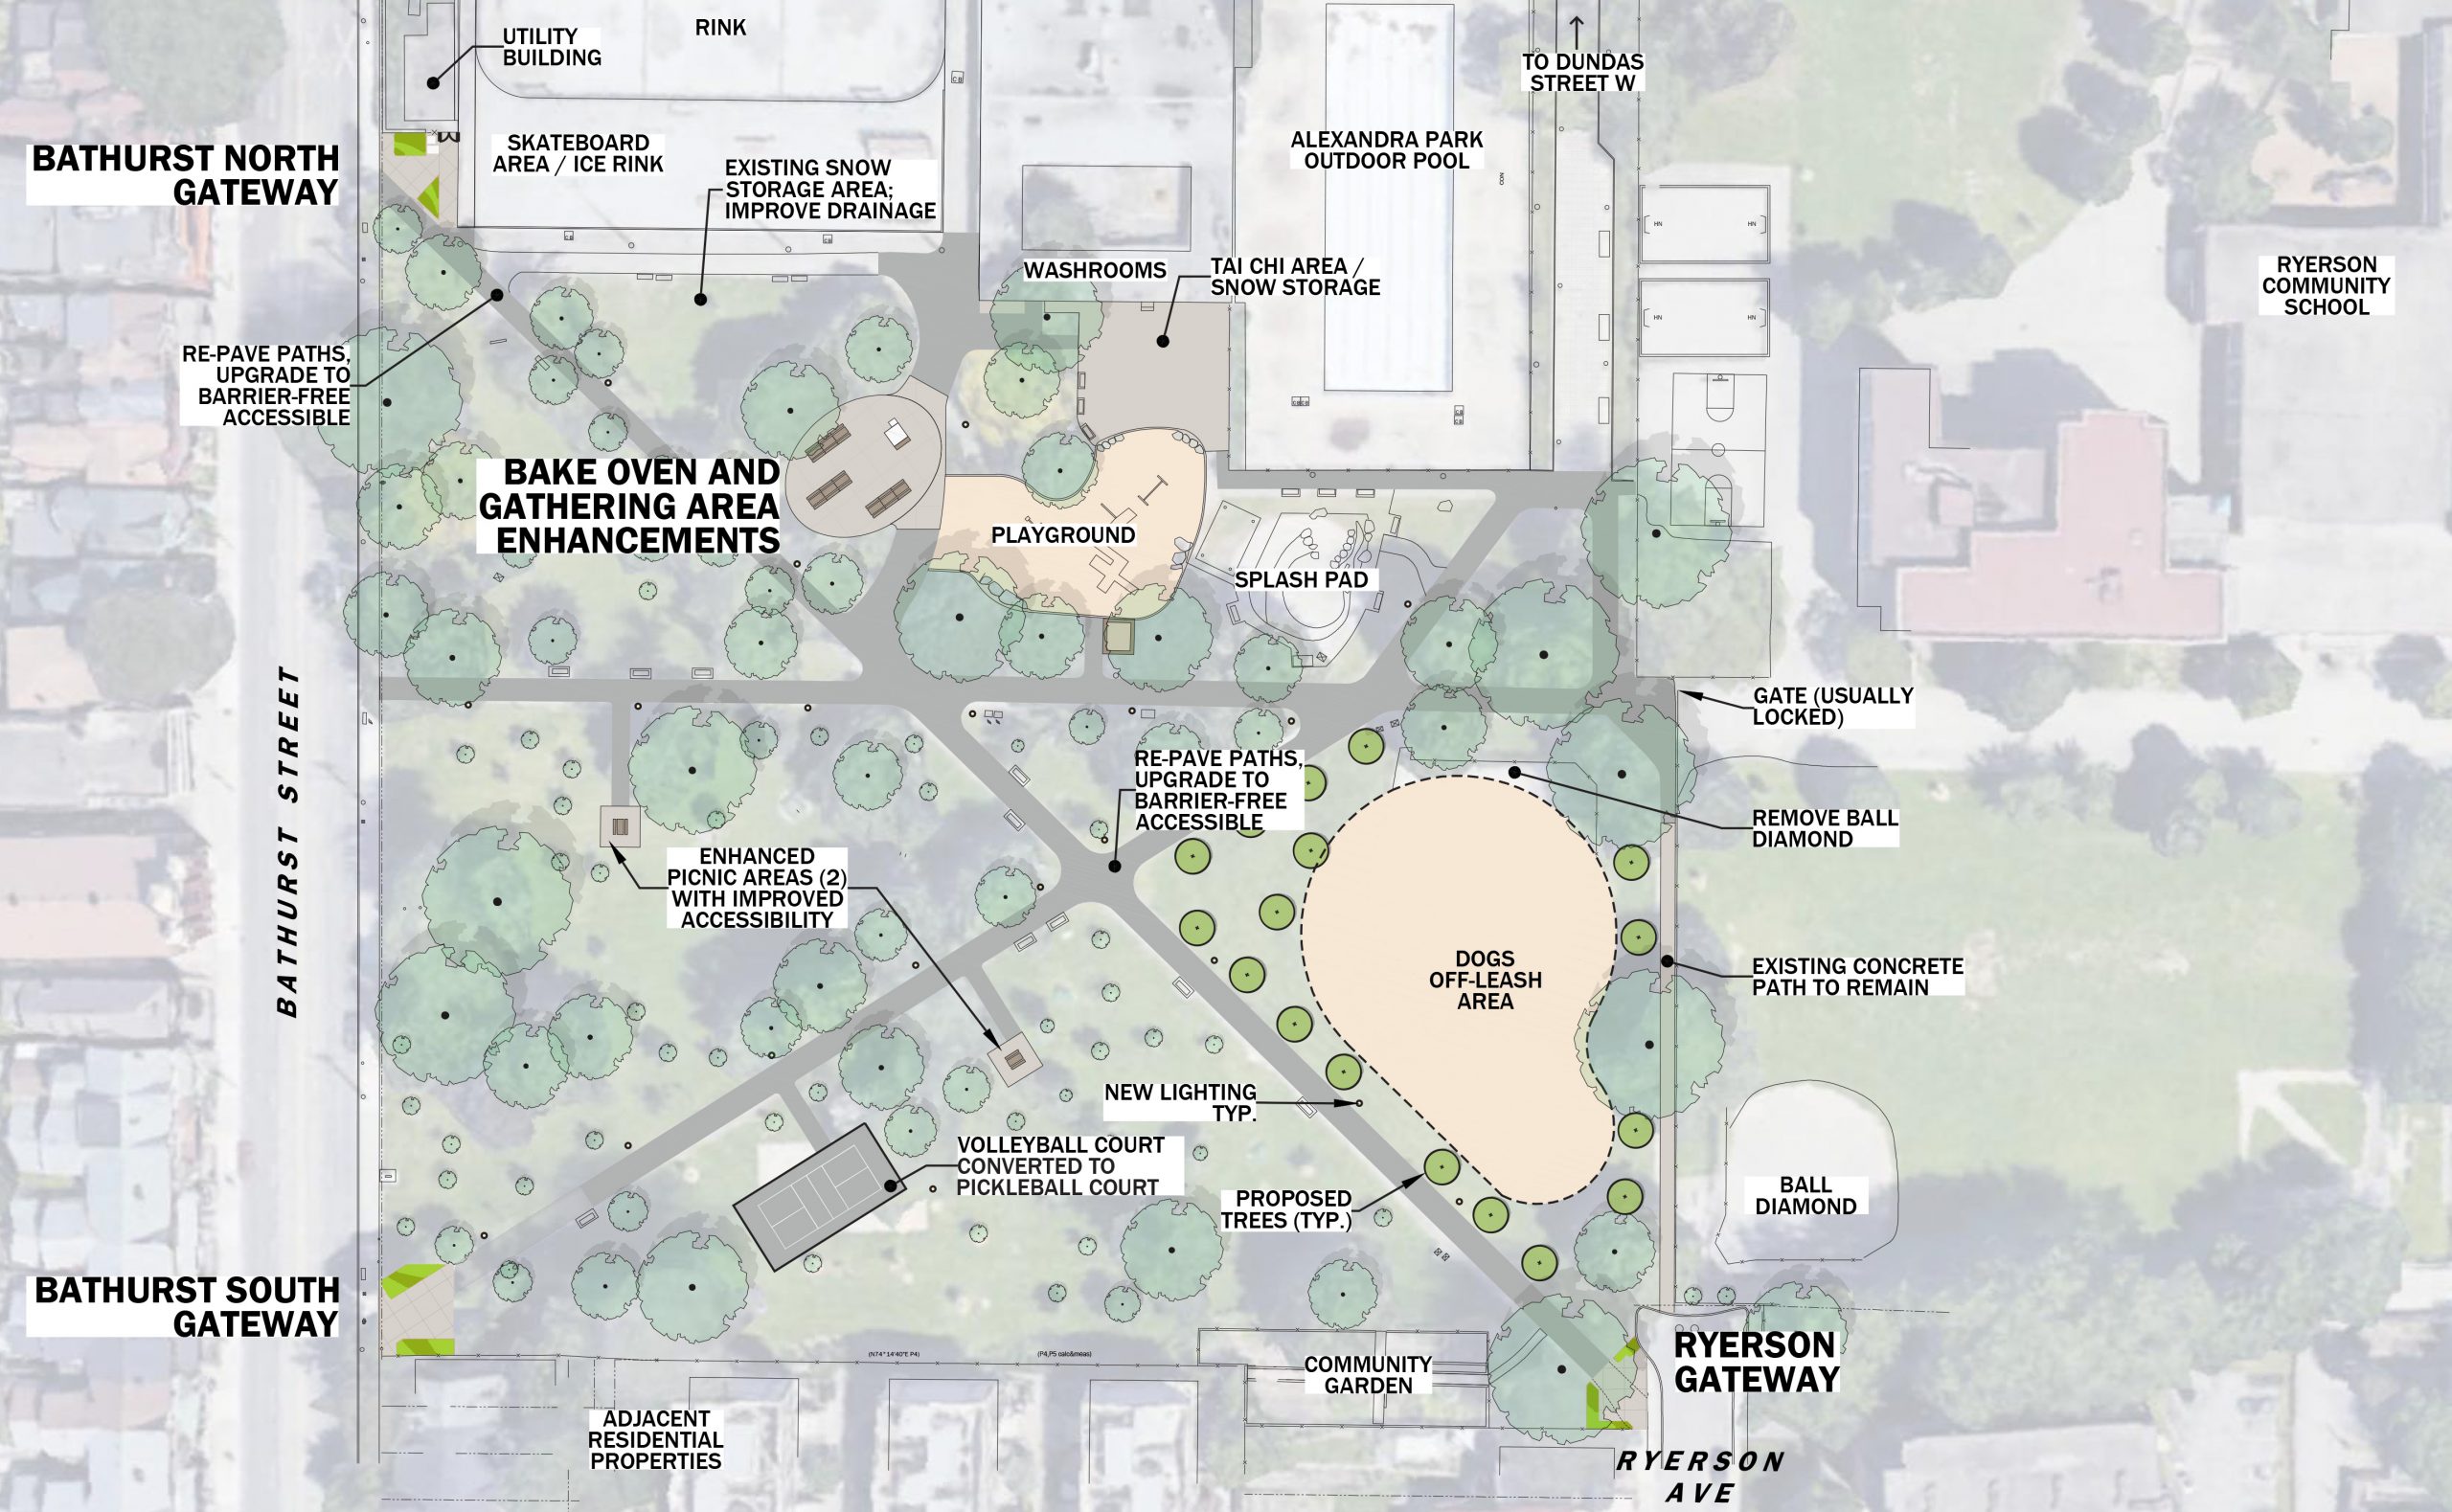 : This is an image of the Proposed Plan. It illustrates the improvements which are proposed for Alexandra Park. Improvements include: Re-paving the pathways and upgrading them so they are barrier free accessible; enhancements to the bake oven area with a new gathering space including picnic tables; upgraded entrances at the north & south Bathurst Street entrances and the Ryerson Avenue entrance; conversion of the existing ball diamond area to a dogs off leash area; and conversion of the old volleyball court to a pickle ball court.